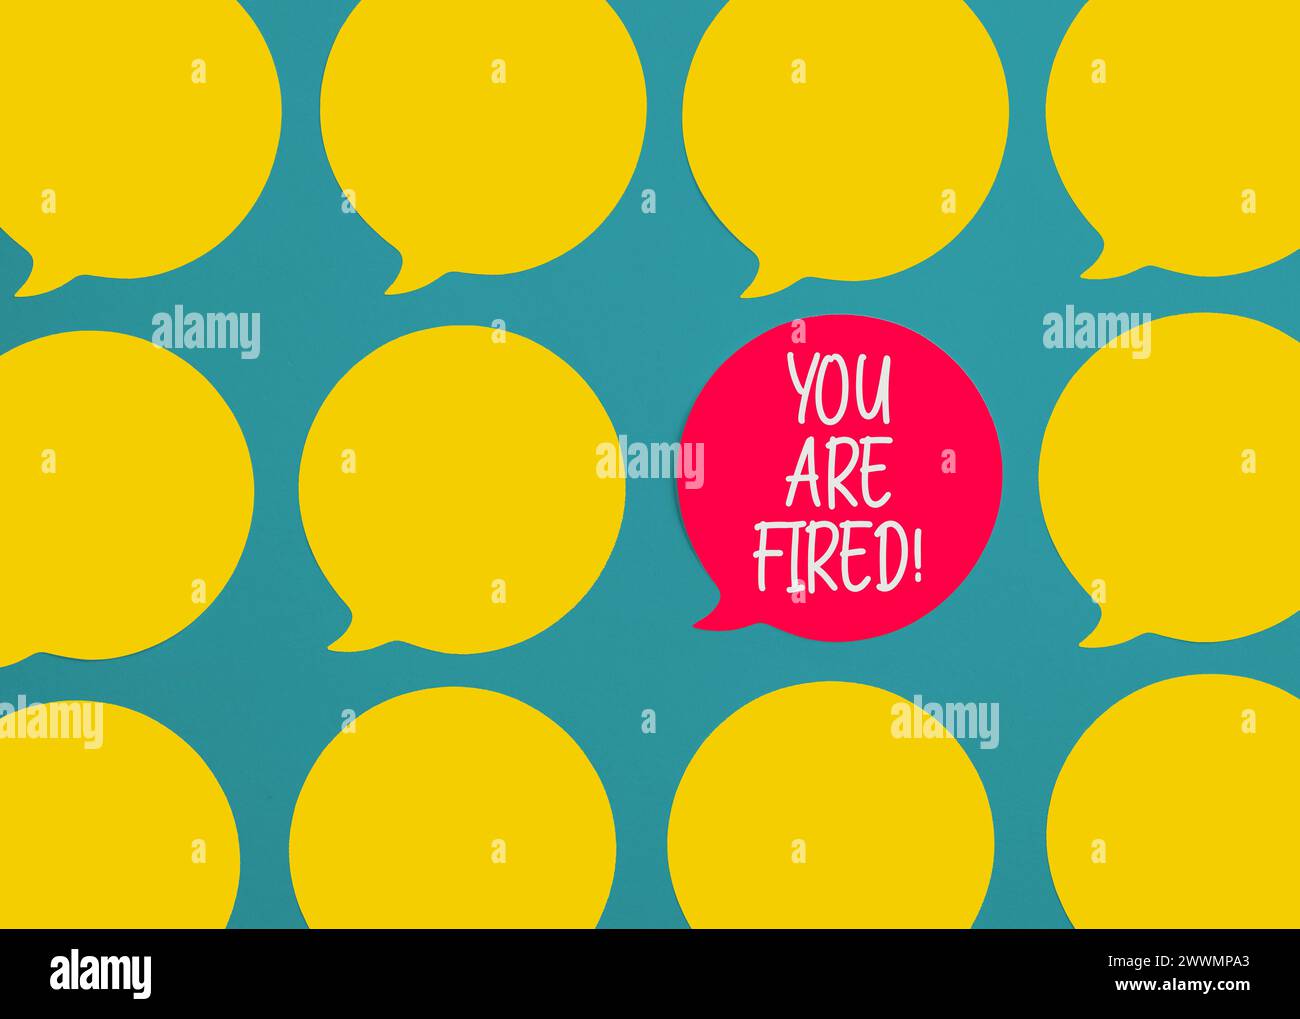 You are fired message on speech bubble. Employment and job loss. Unemployment. Employee dismissal. Stock Photo